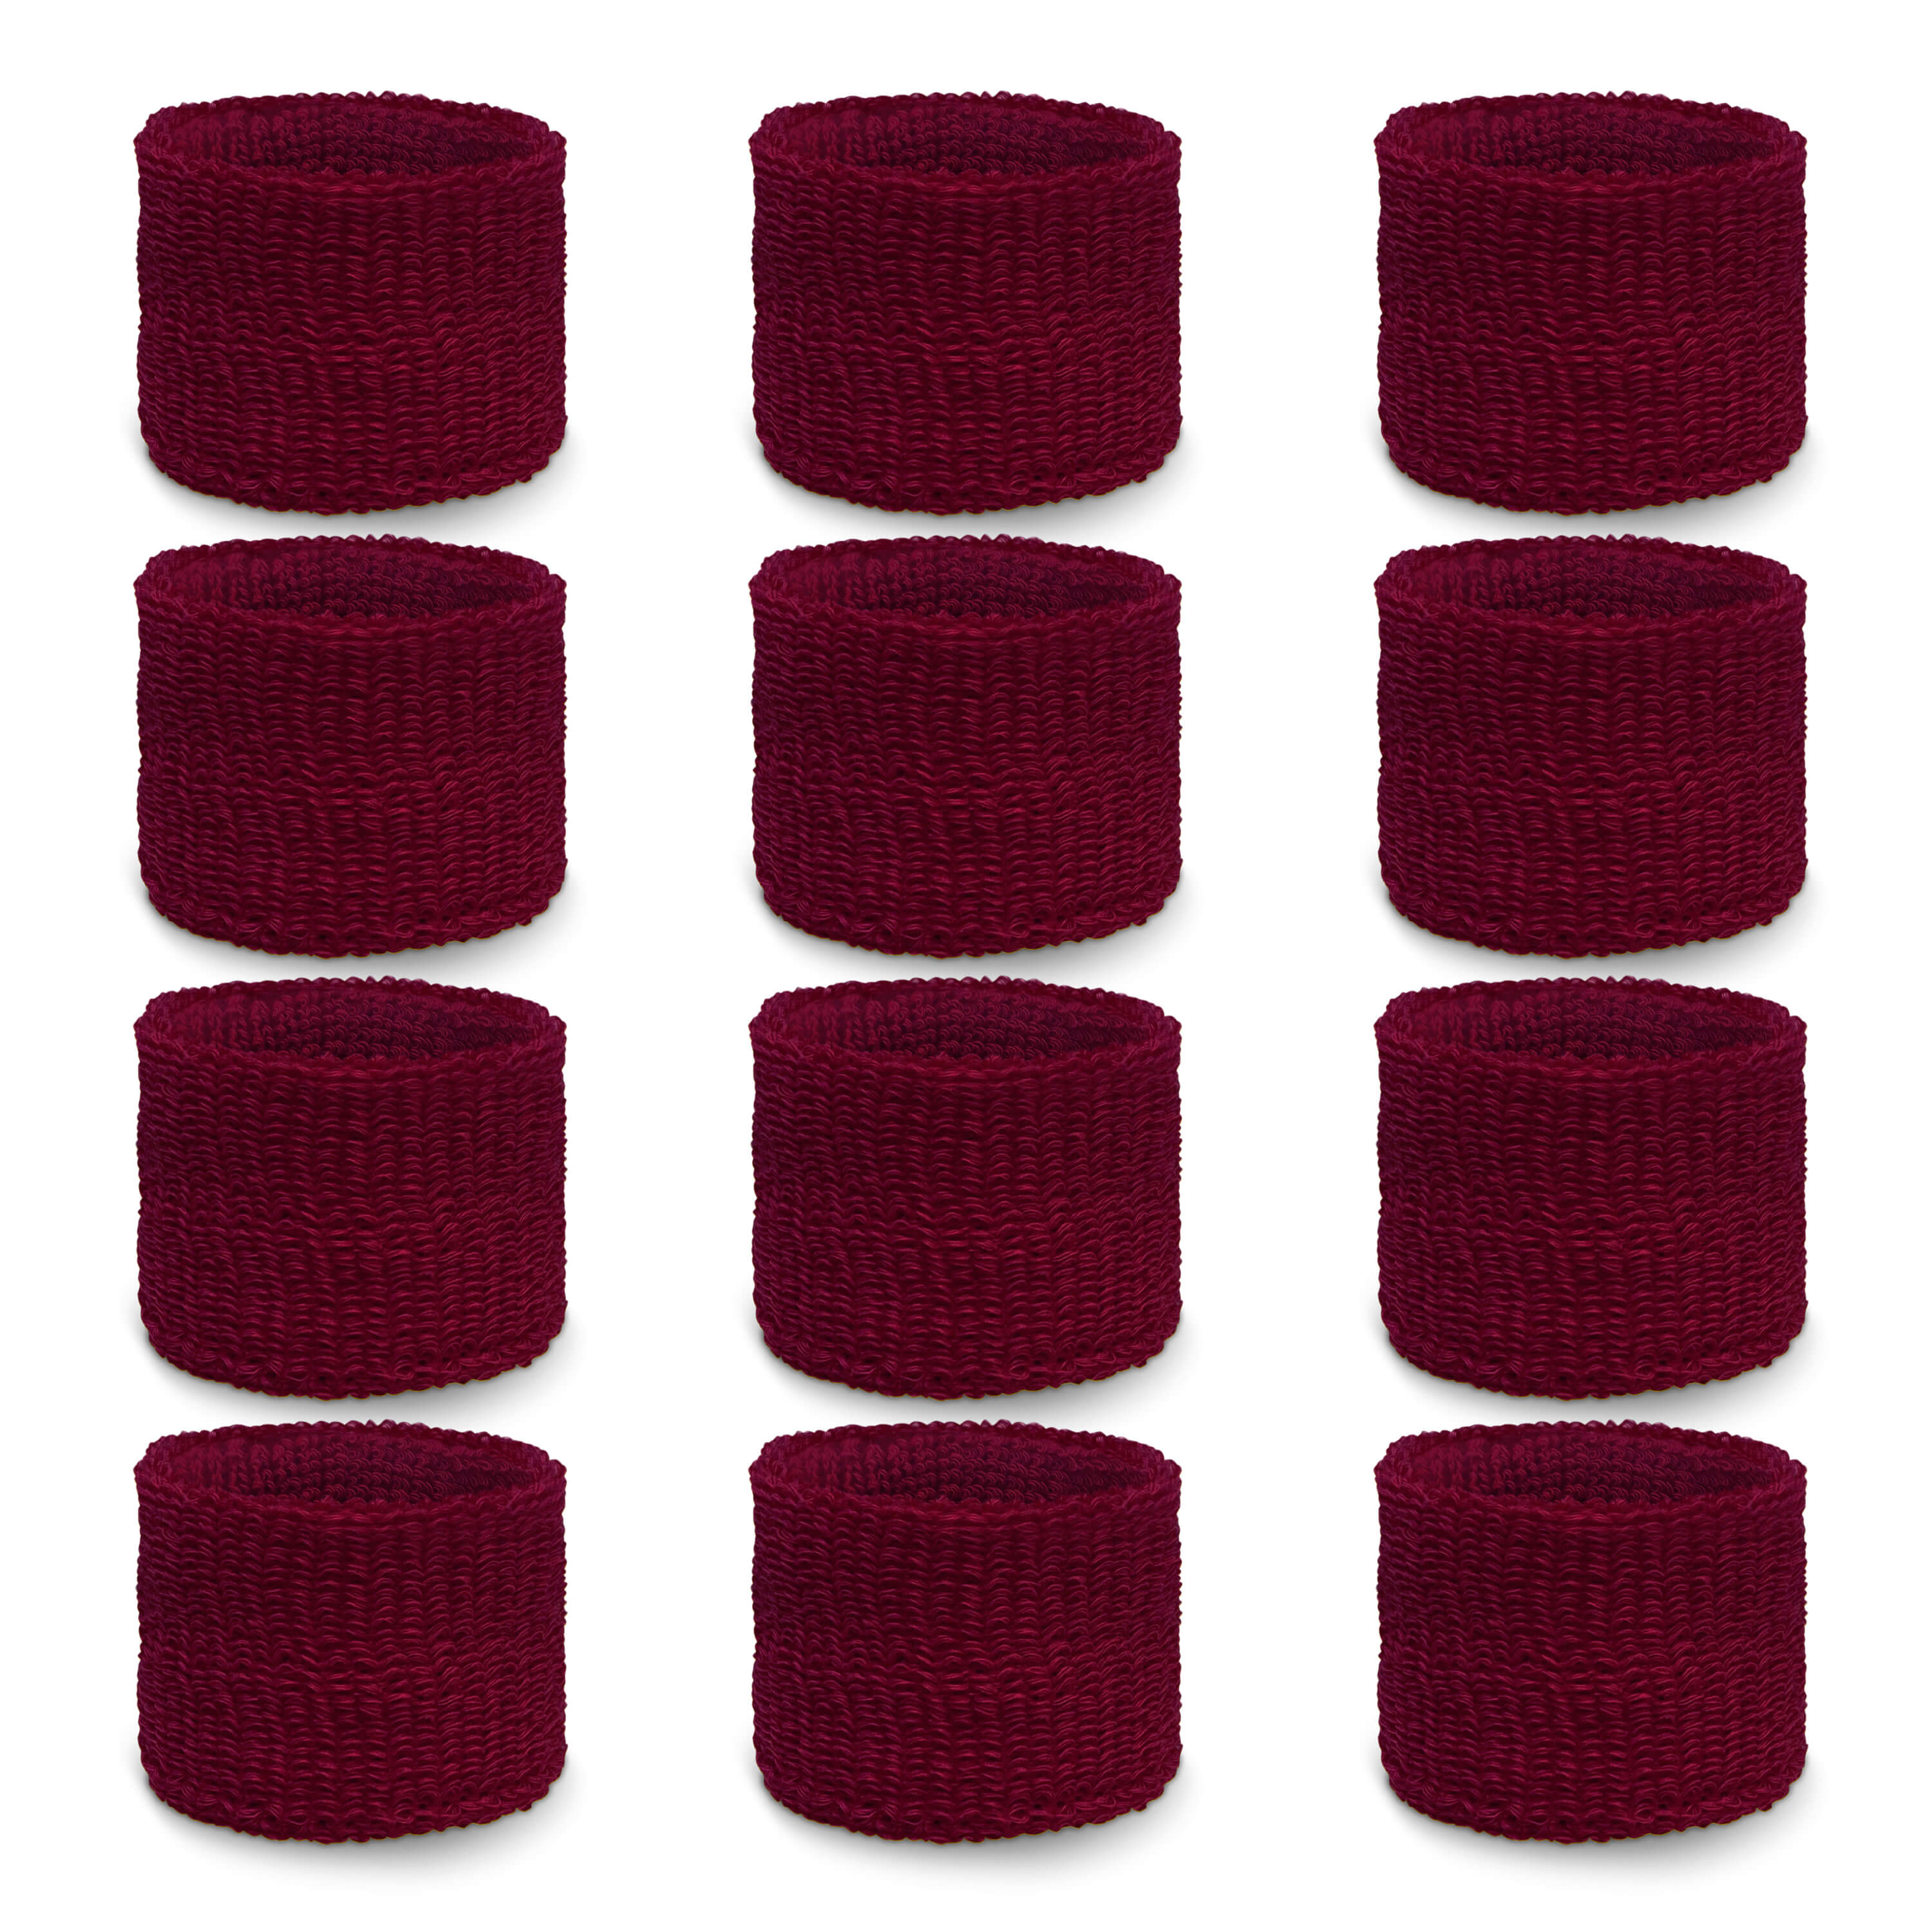 Maroon youth wristbands wholesale for school and church [6pairs]